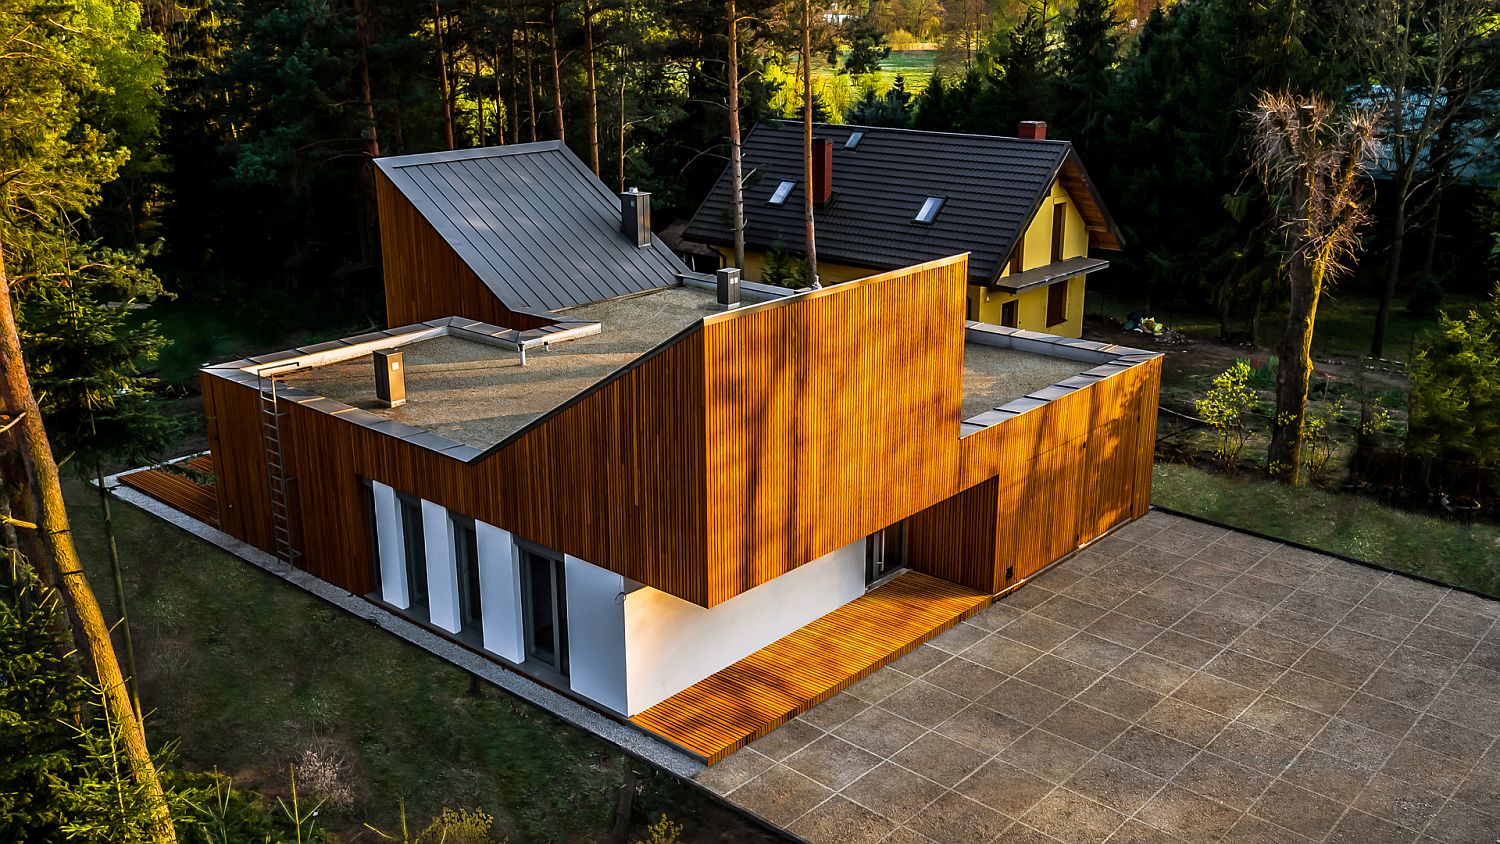 Sloped roofs and wooden cladding of the home gives it a unique look